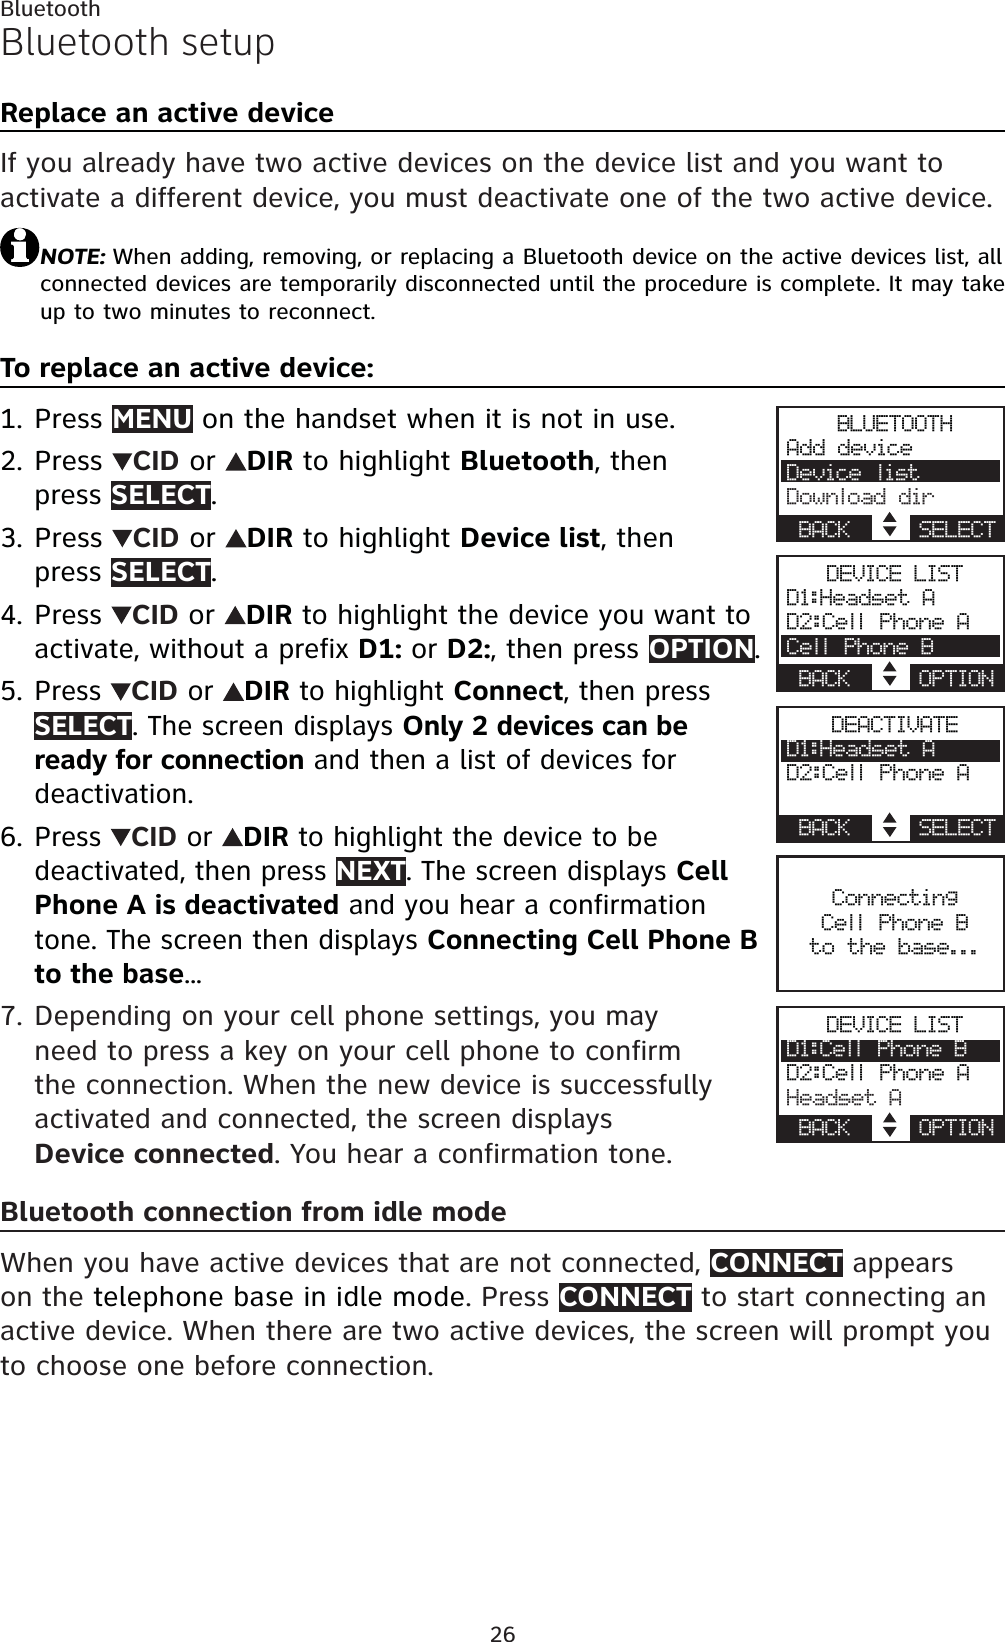 26BluetoothBluetooth setupReplace an active deviceIf you already have two active devices on the device list and you want to activate a different device, you must deactivate one of the two active device.NOTE: When adding, removing, or replacing a Bluetooth device on the active devices list, all connected devices are temporarily disconnected until the procedure is complete. It may take up to two minutes to reconnect.To replace an active device:Press MENU on the handset when it is not in use.Press  CID or  DIR to highlight Bluetooth, then press SELECT.Press  CID or  DIR to highlight Device list, then press SELECT.Press CID or  DIRto highlight the device you want to activate, without a prefix D1: or D2:, then press OPTION.Press CID or  DIR to highlight Connect, then pressSELECT. The screen displays Only 2 devices can be ready for connection and then a list of devices for deactivation.Press  CID or  DIR to highlight the device to be deactivated, then press NEXT. The screen displays CellPhone A is deactivated and you hear a confirmation tone. The screen then displays Connecting Cell Phone B to the base...Depending on your cell phone settings, you may need to press a key on your cell phone to confirm the connection. When the new device is successfully activated and connected, the screen displaysDevice connected. You hear a confirmation tone.Bluetooth connection from idle modeWhen you have active devices that are not connected, CONNECT appears on the telephone base in idle mode. Press CONNECT to start connecting an active device. When there are two active devices, the screen will prompt you to choose one before connection.1.2.3.4.5.6.7.BLUETOOTHAdd deviceDevice listDownload dirBACK    SELECTDEVICE LISTD1:Headset AD2:Cell Phone ACell Phone BBACK    OPTIONDEACTIVATED1:Headset AD2:Cell Phone ABACK    SELECTConnectingCell Phone B to the base...DEVICE LISTD1:Cell Phone BD2:Cell Phone AHeadset ABACK    OPTION